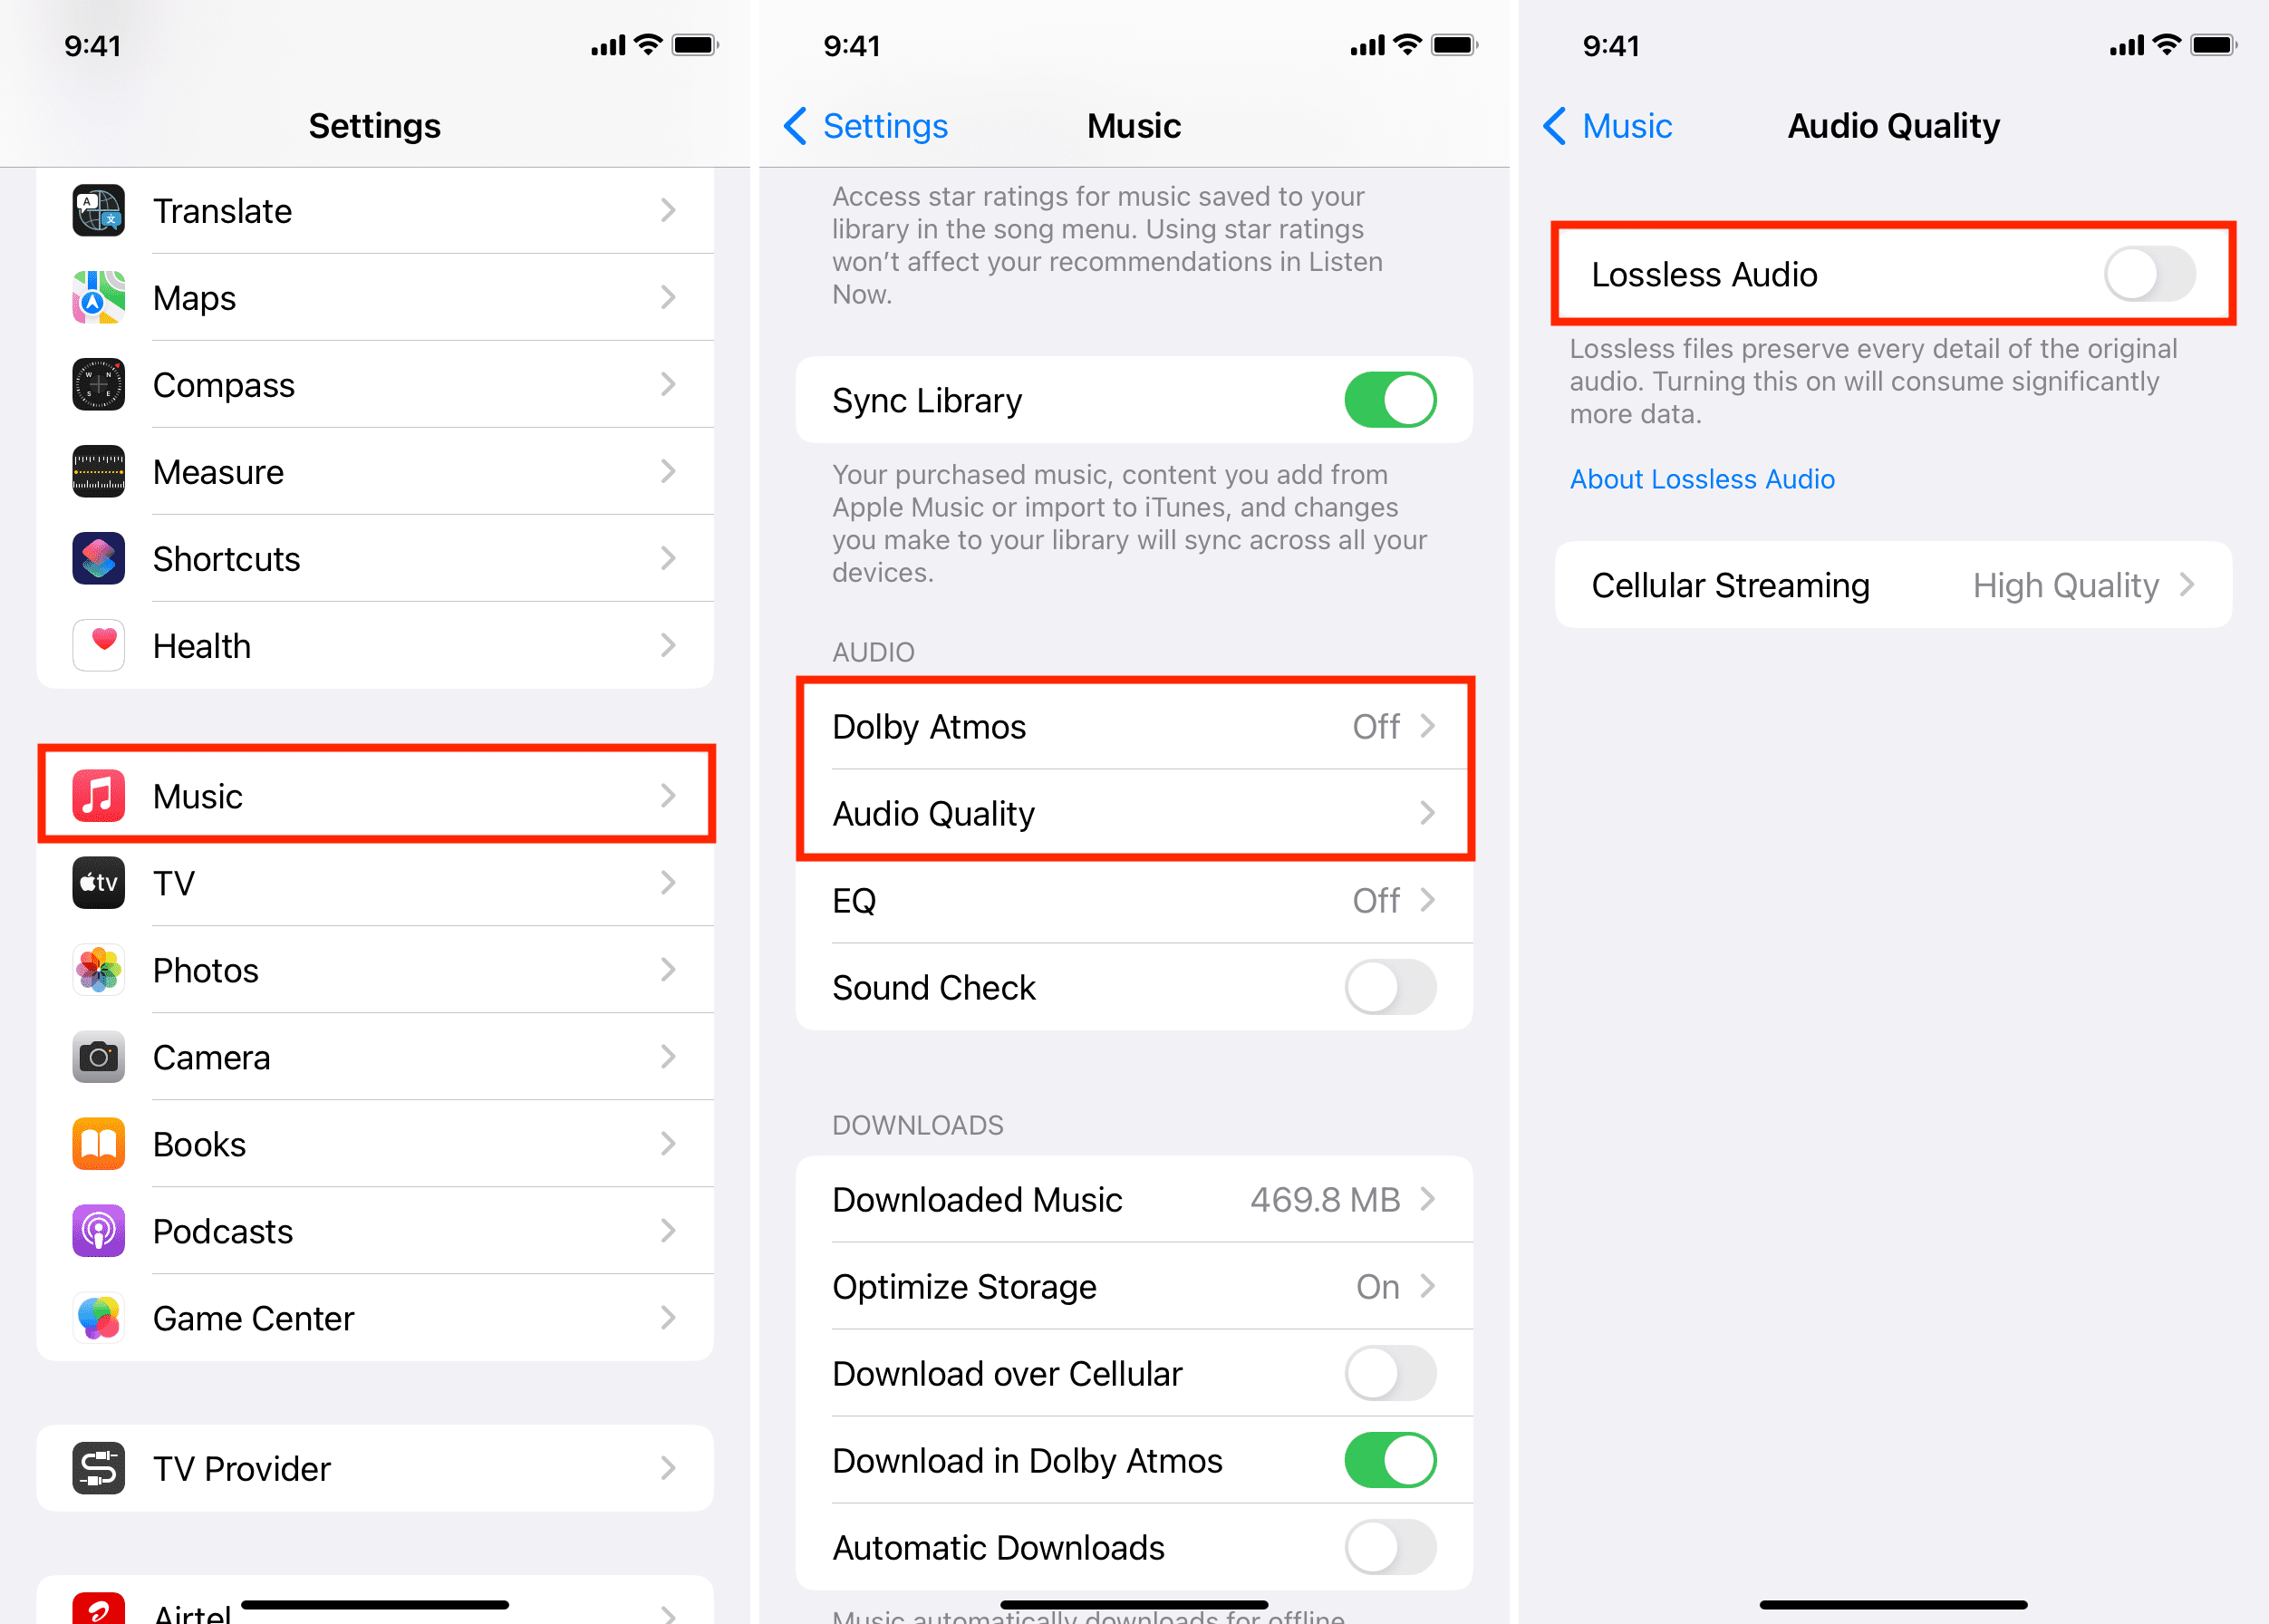 Turn off Dolby Atmos and Lossless Audio on iPhone